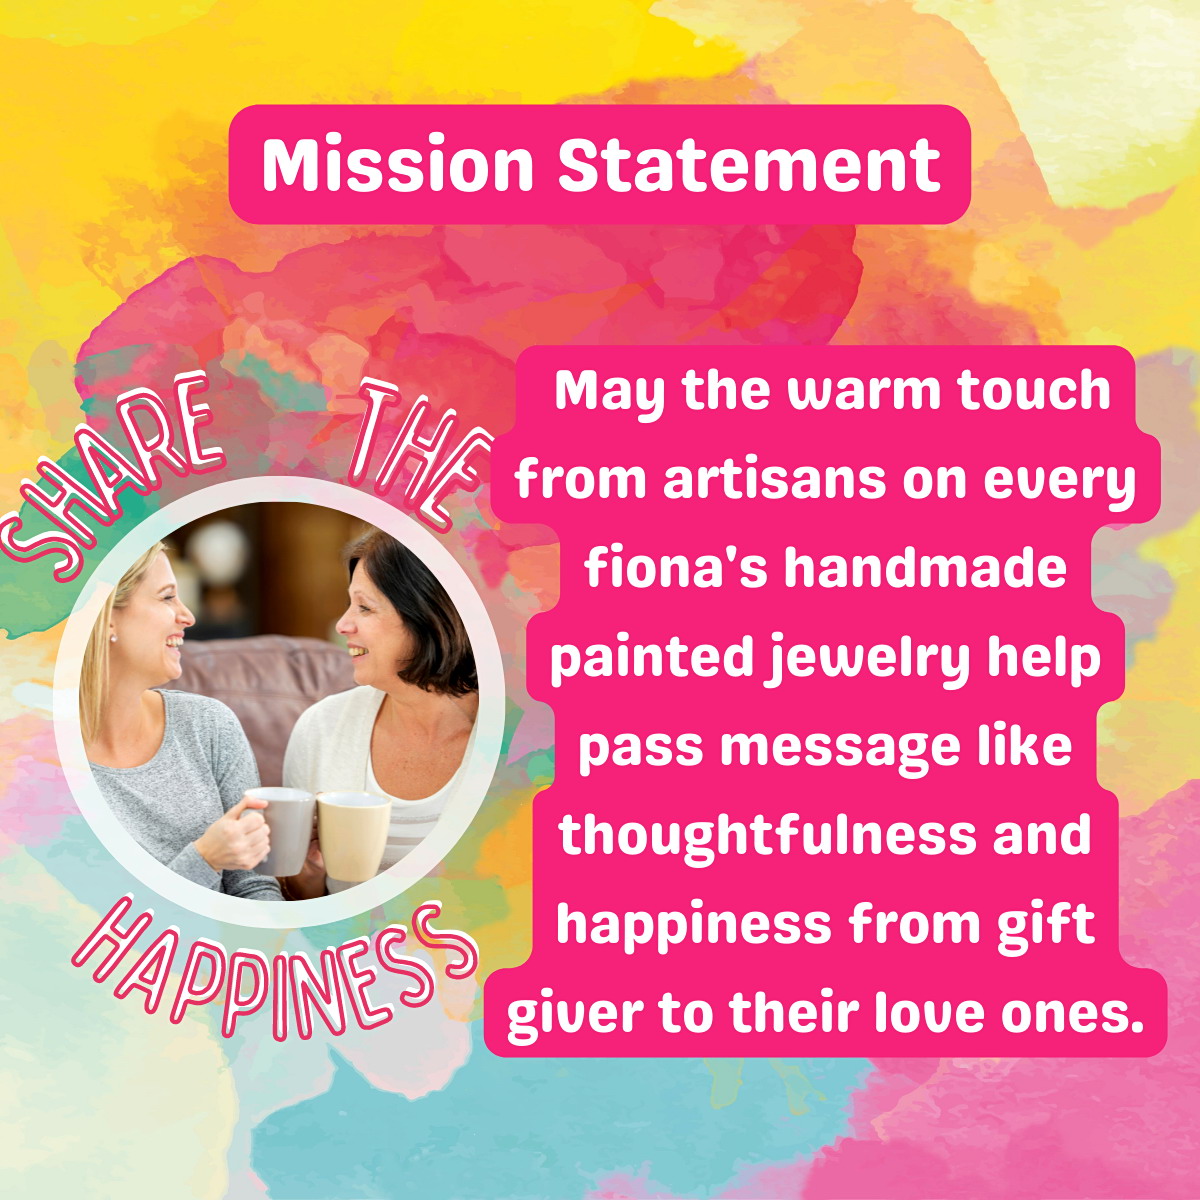 Fionaaccessories.com mission statement: Share the happiness.